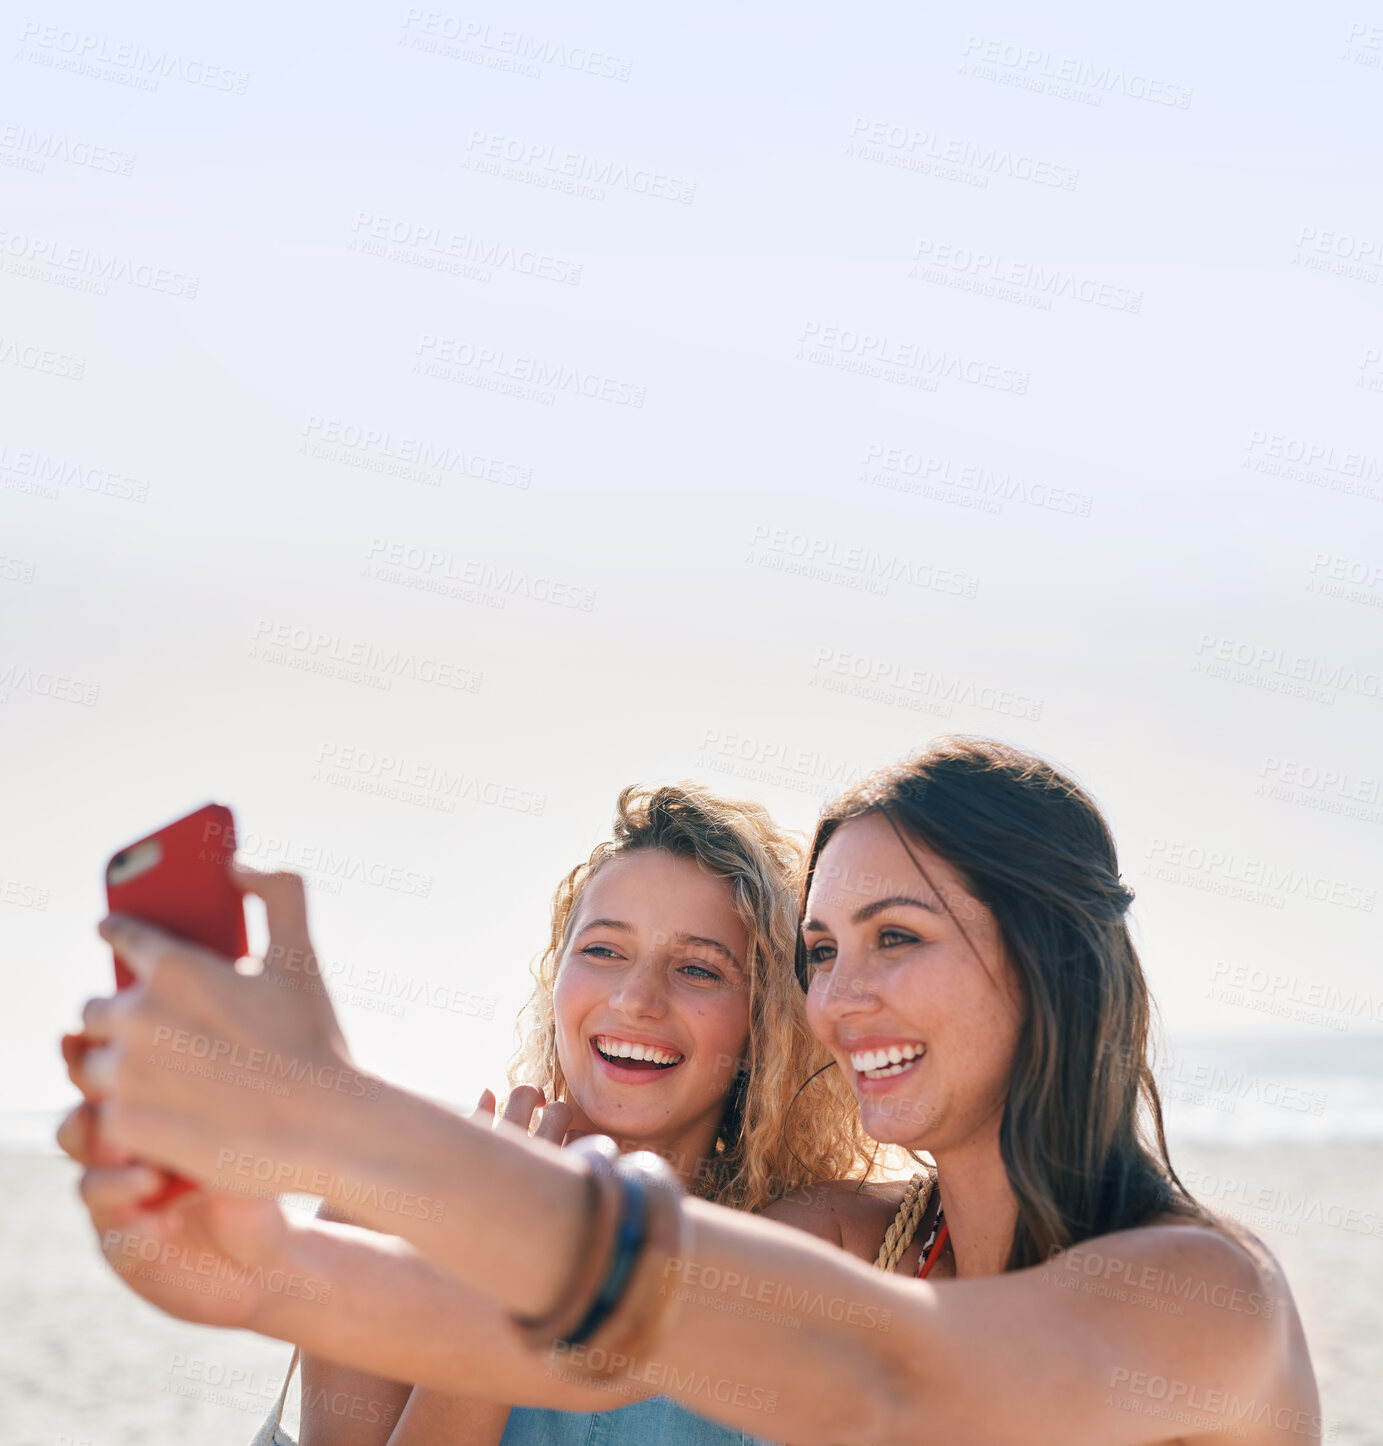 Buy stock photo beautiful woman friends taking photo using smartphone camera on beach smiling happy sharing vacation on social media